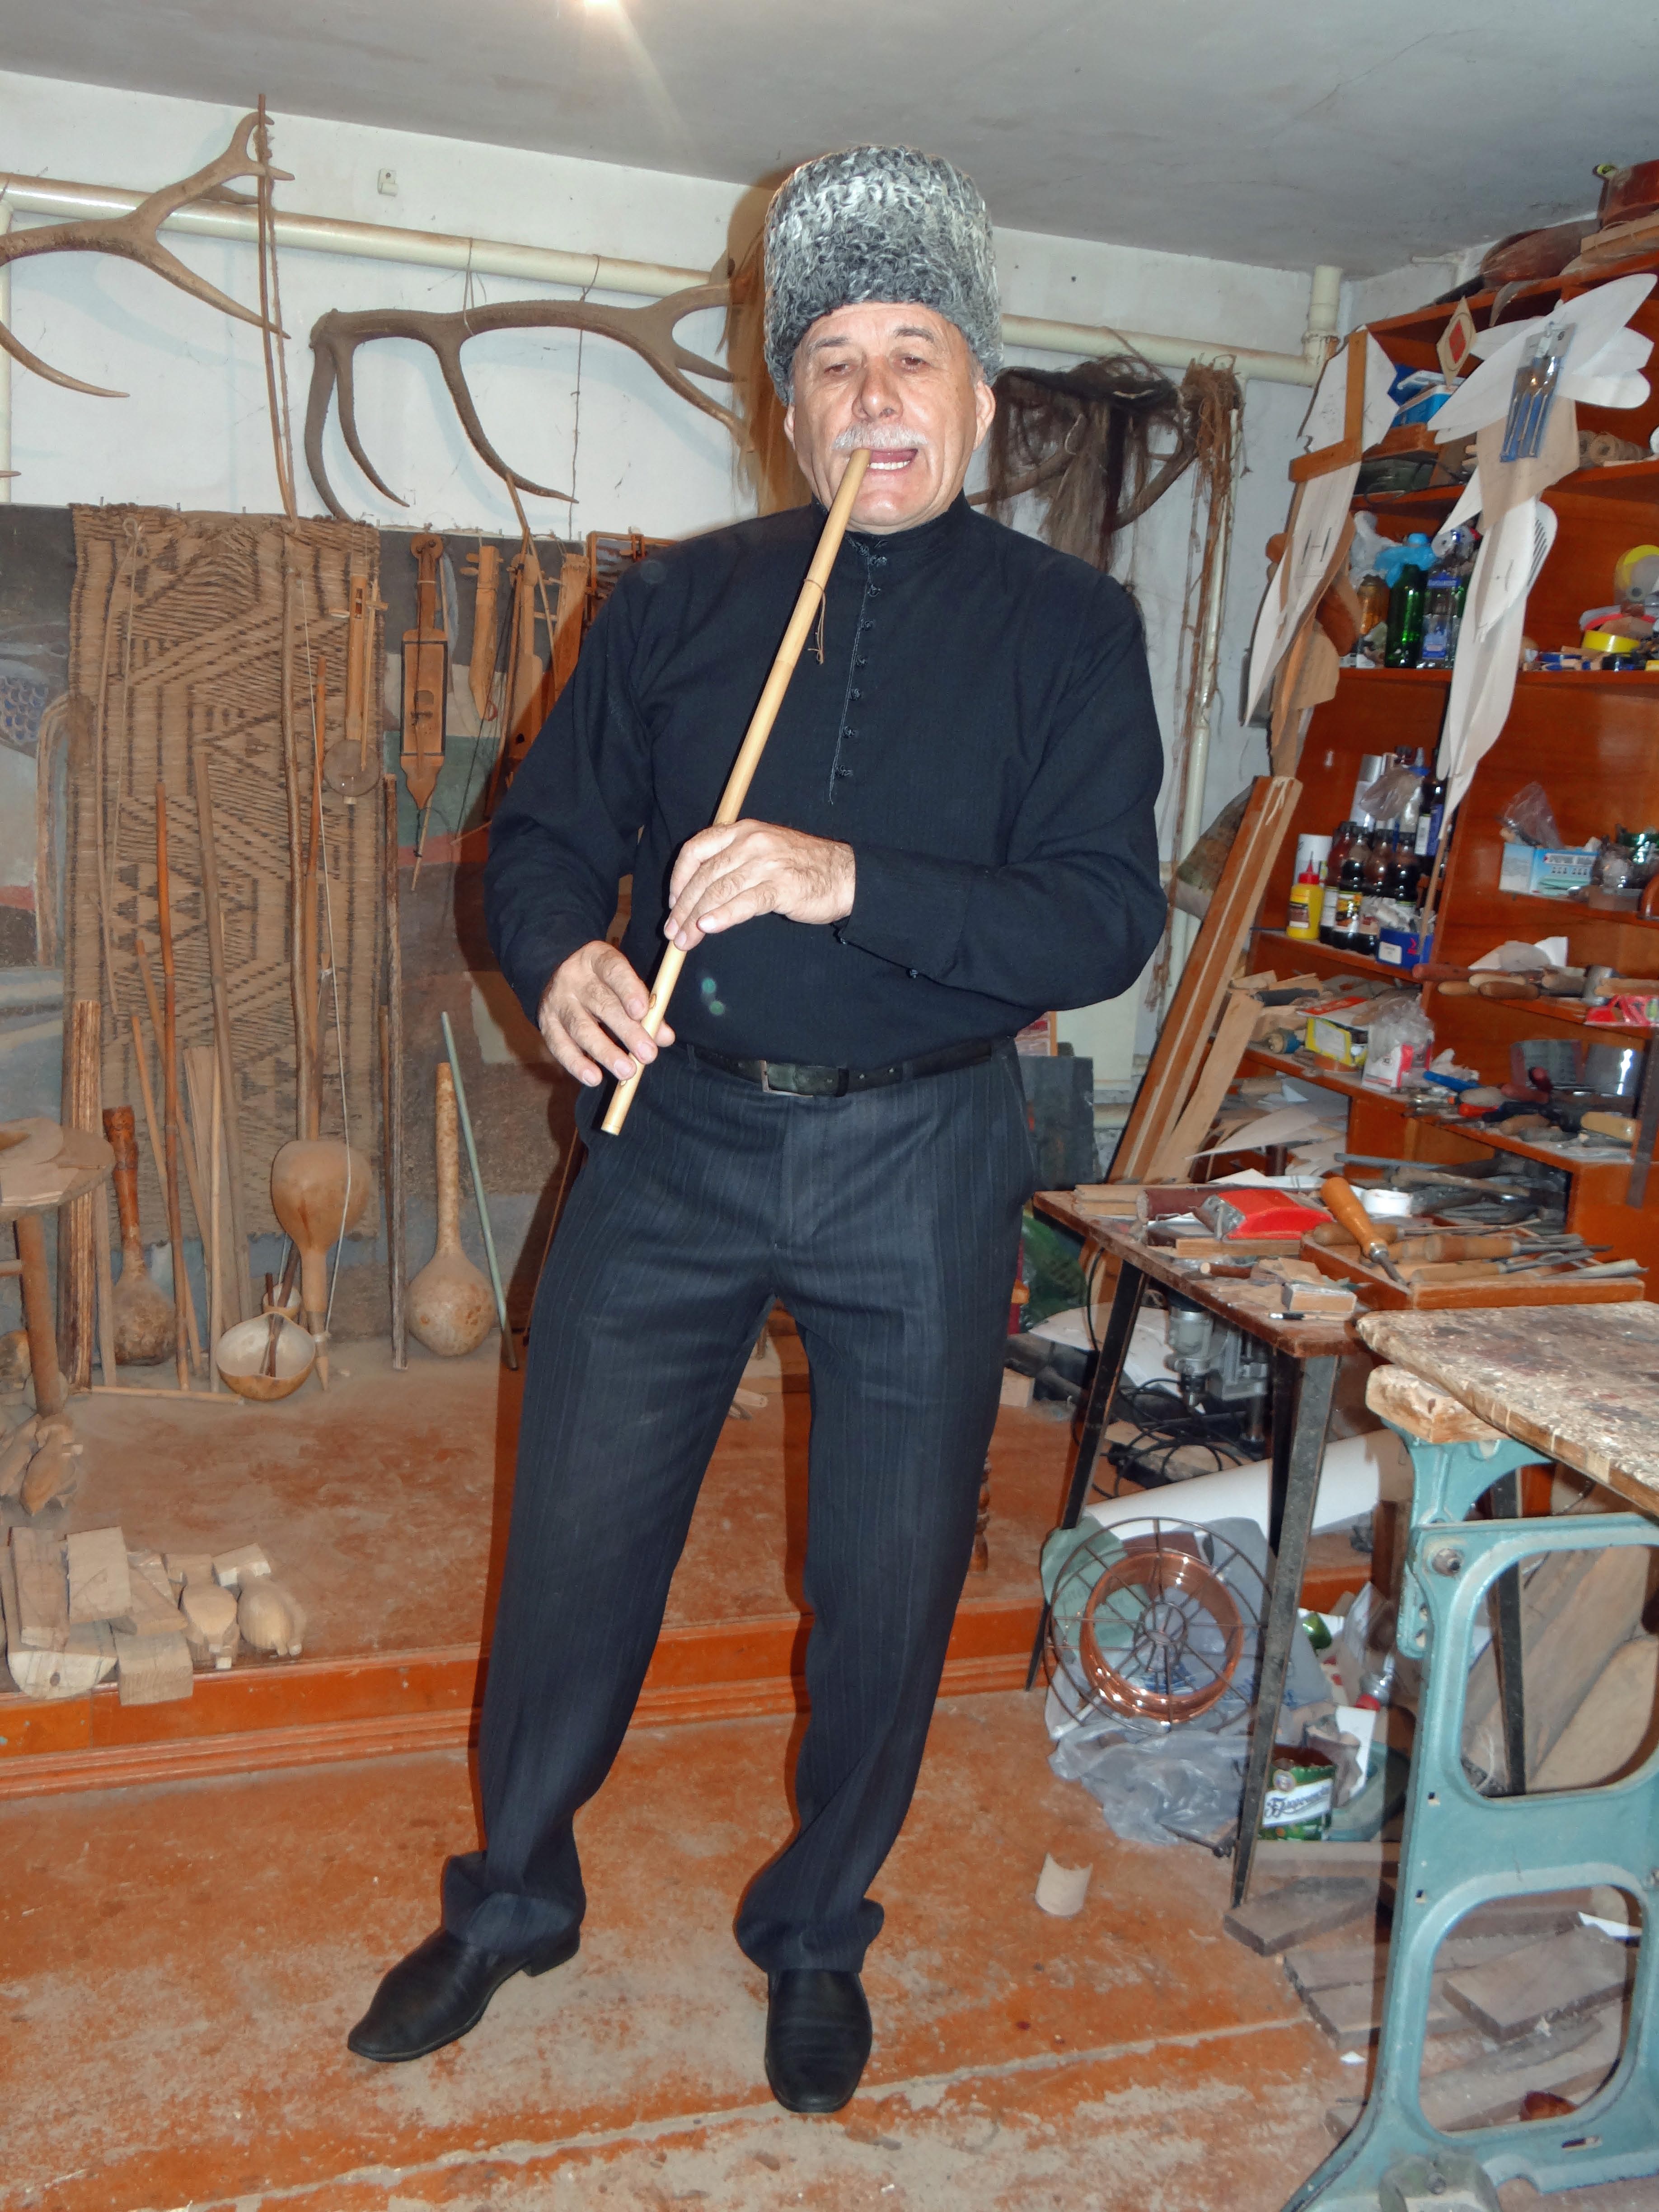 This is an instrument maker in Maykop; he has this flute anchored on a tooth!  Never have I seen this before, but it works.